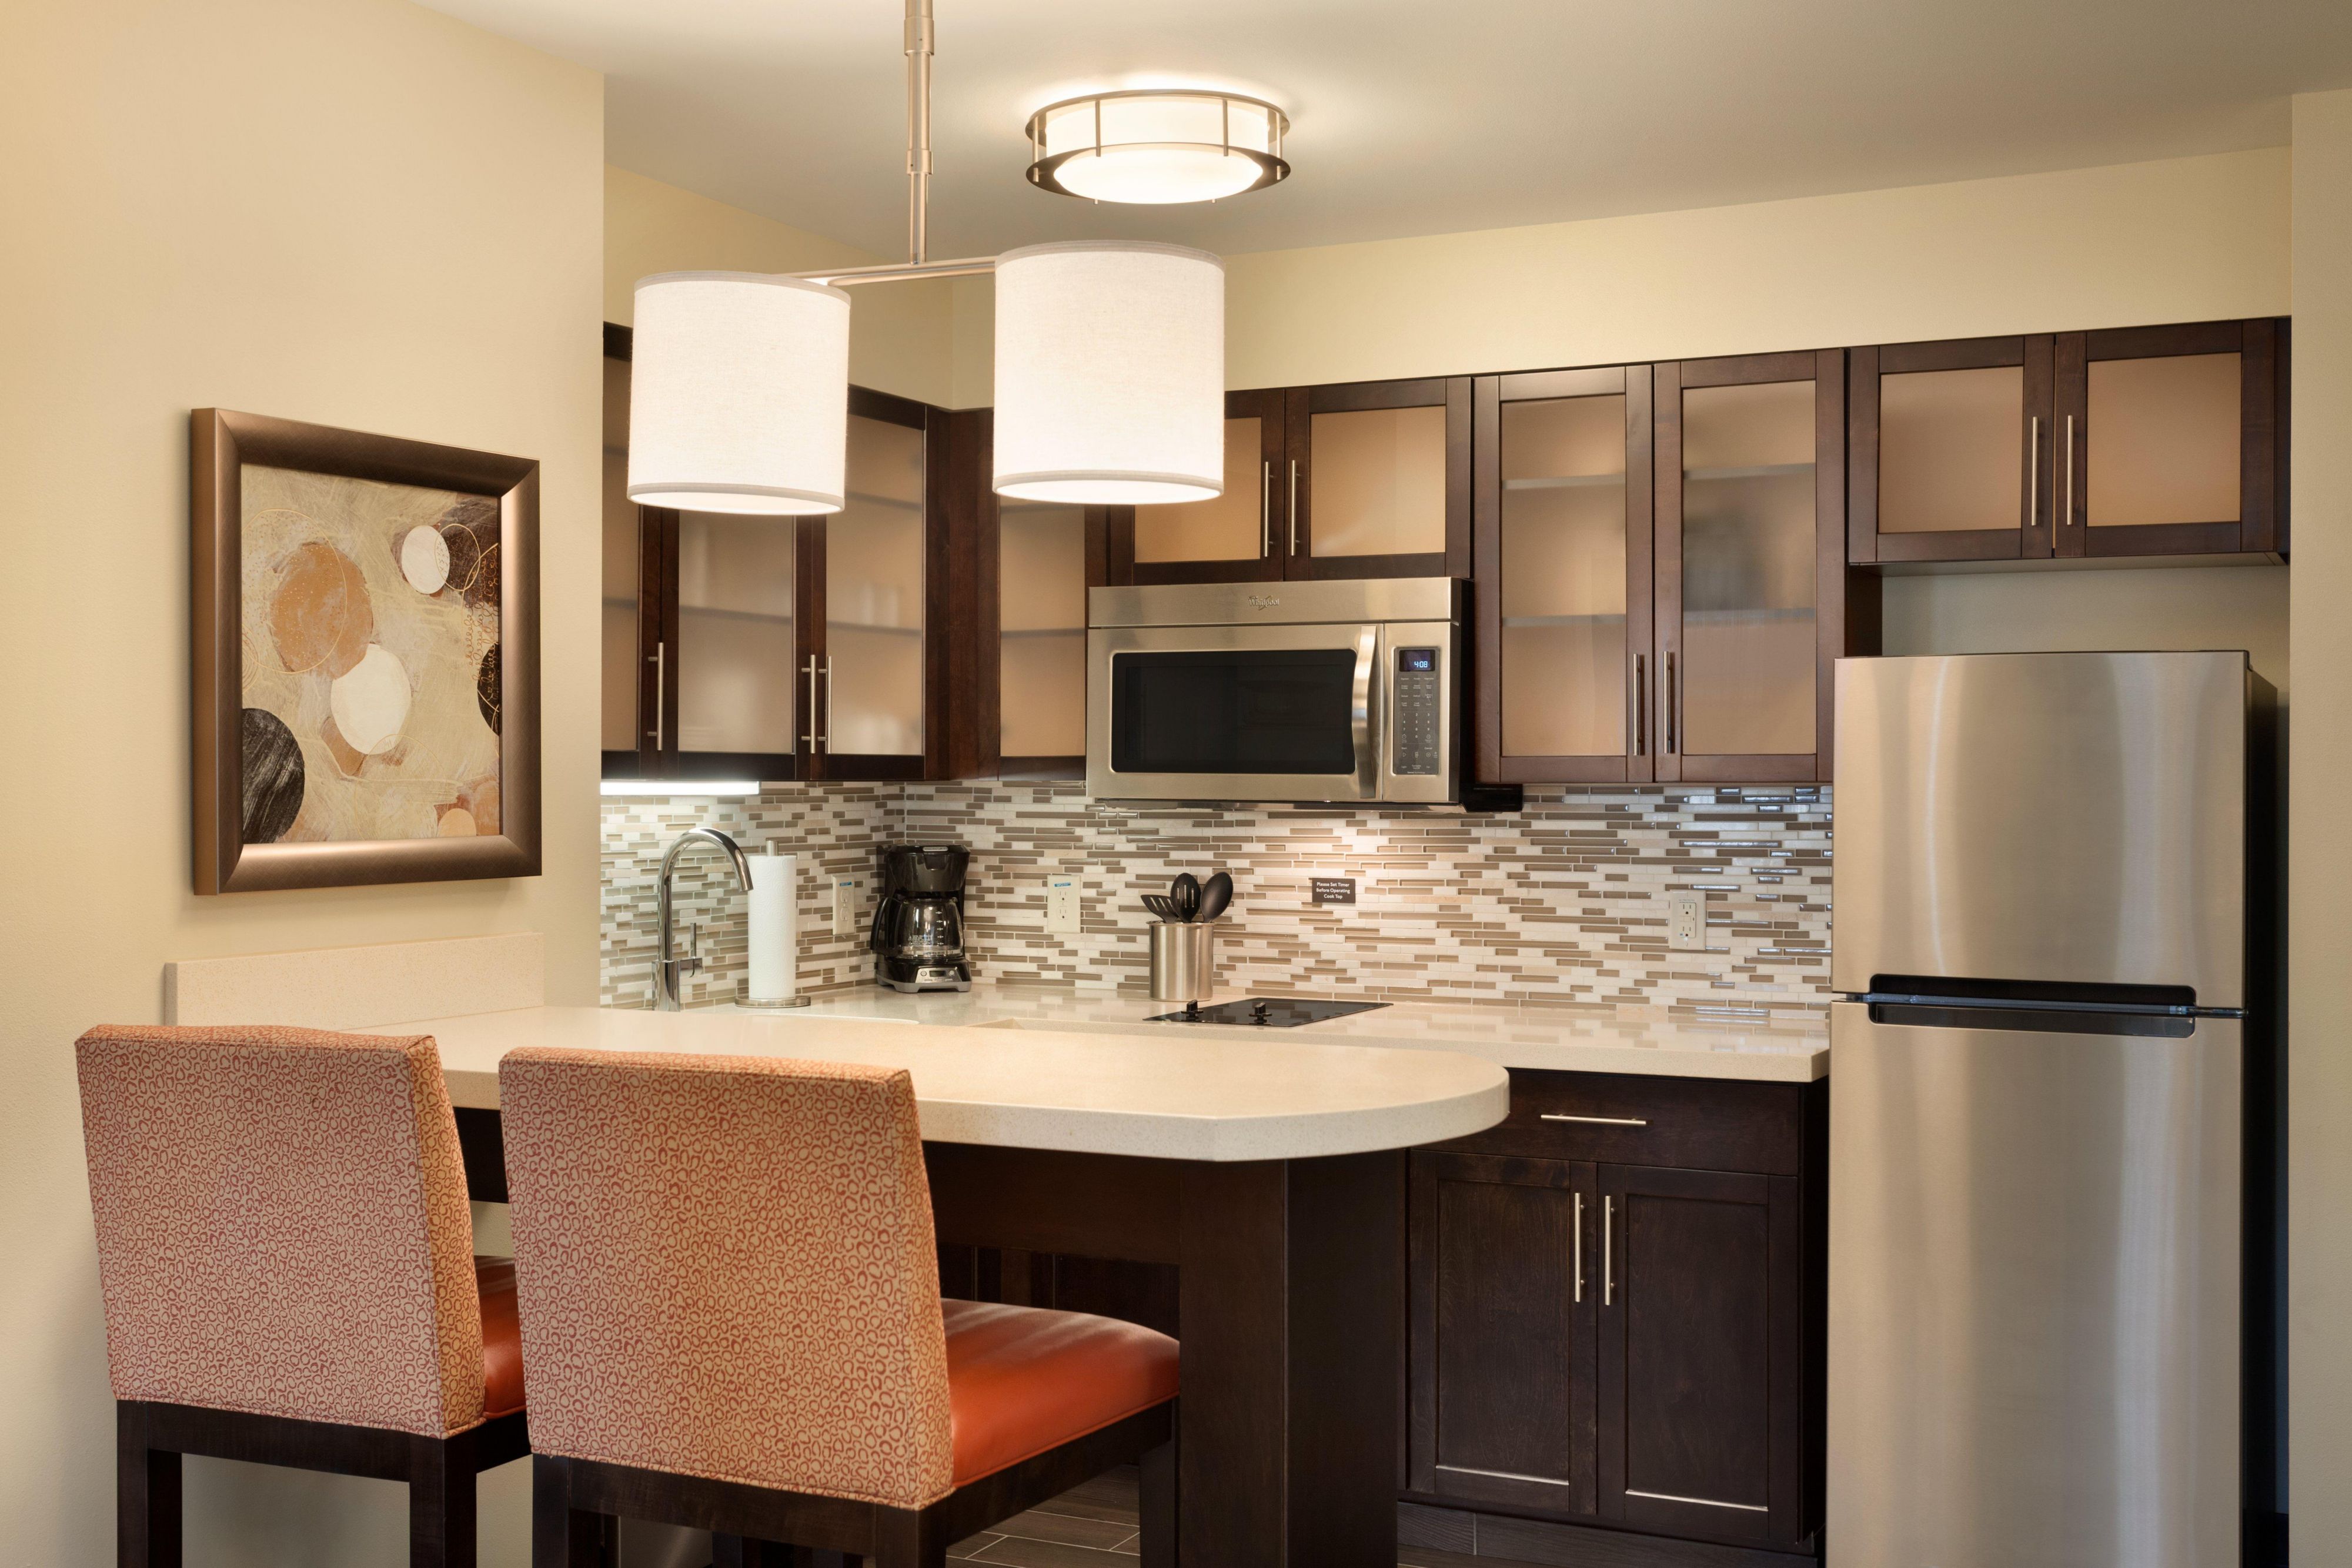 Make yourself at home in our apartment-style suites with full kitchens, including a microwave, refrigerator, cooking utensils, and more.